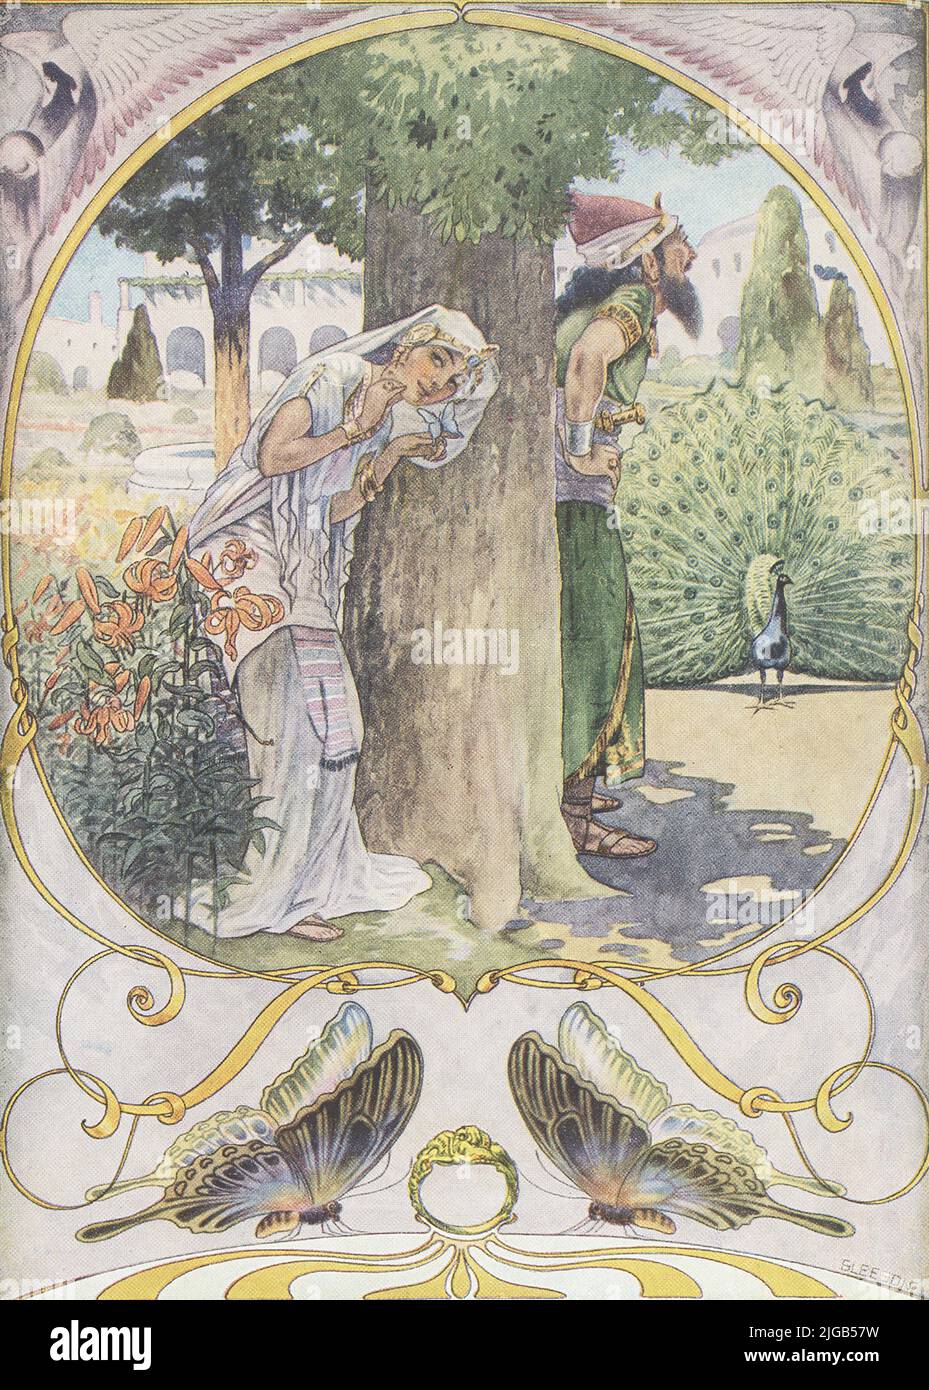 This 1912 image by J M Gleeson illustrates Kipling’s The butterfly that stamped. King Solomon was so wise he could understand what all creatures said, as well as rocks, trees, plants and people, and his Head Queen Balkis was nearly as wise as he. He wore a magic ring that gave him power to summon Djinns, Afrits, Fairies and the Archangel Gabriel. But he was not proud, and if he ever showed off he repented it. Once he tried to feed all the world’s animals in a day, but an Animal came out of the sea and gobbled up all the food, commenting that in his family that was barely a snack, a lesson that Stock Photo